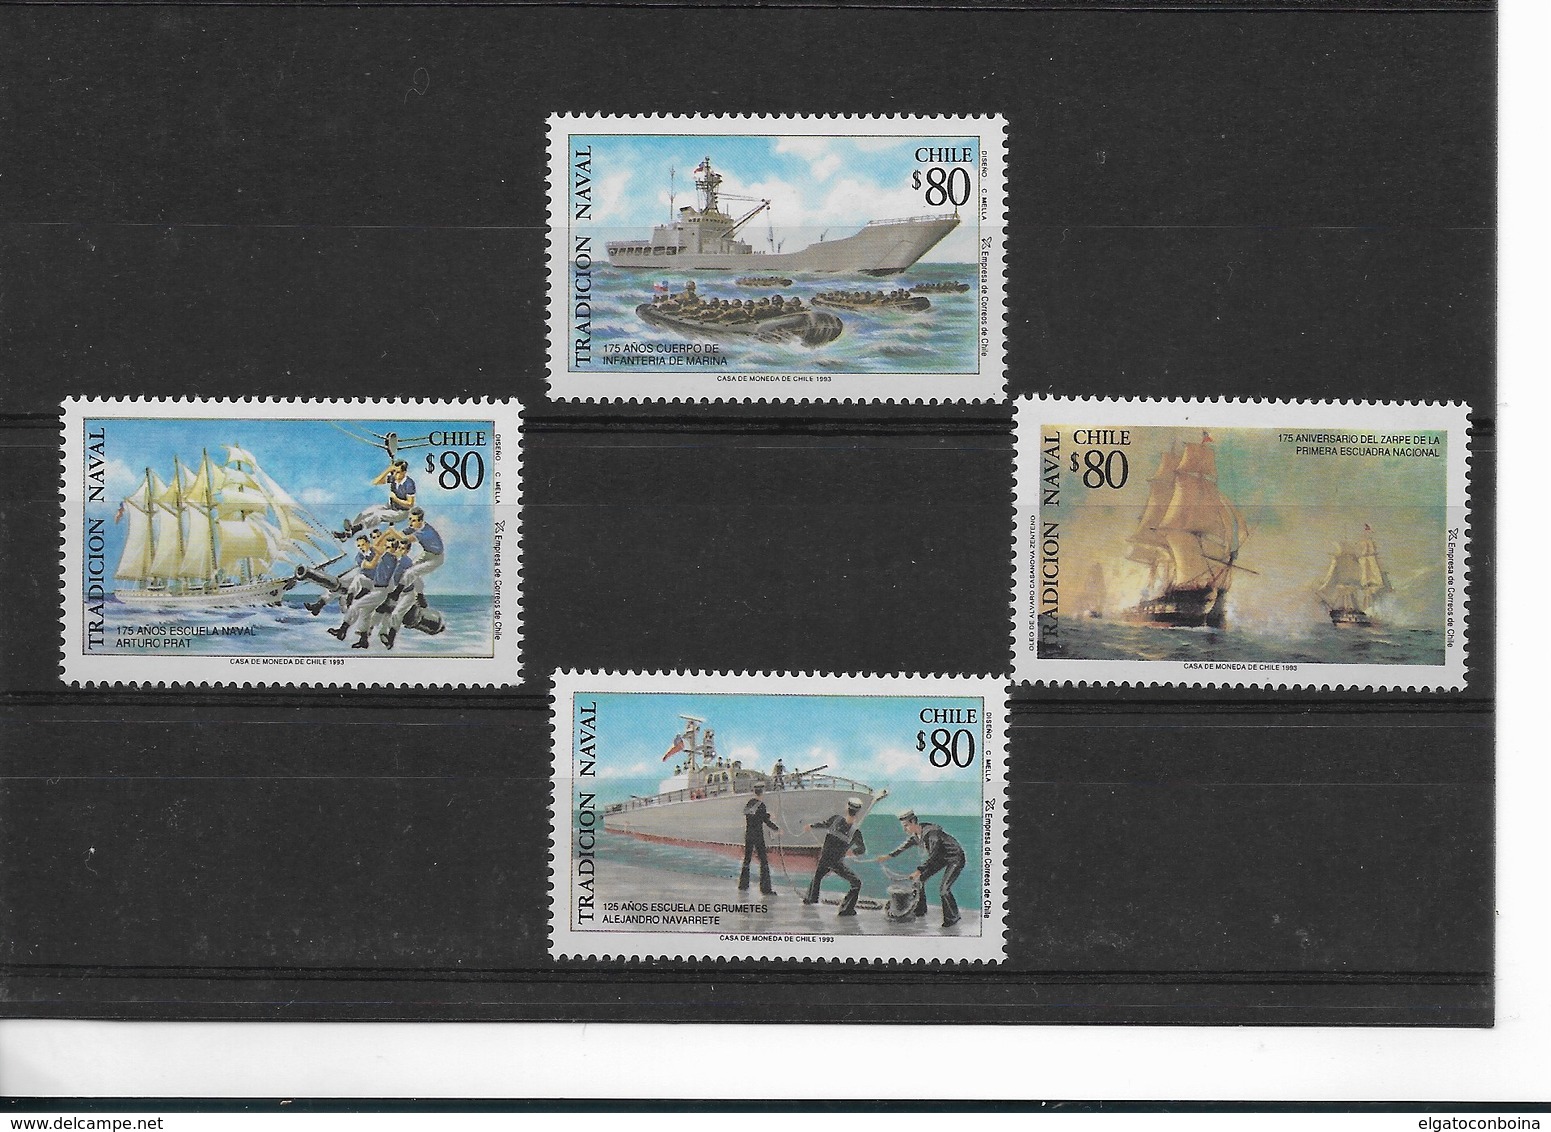 CHILE 1993 NAVAL TRADITION SHIPS MILITARY NAVY SET OF 4 VALUES COMPLETE MNH - Cile